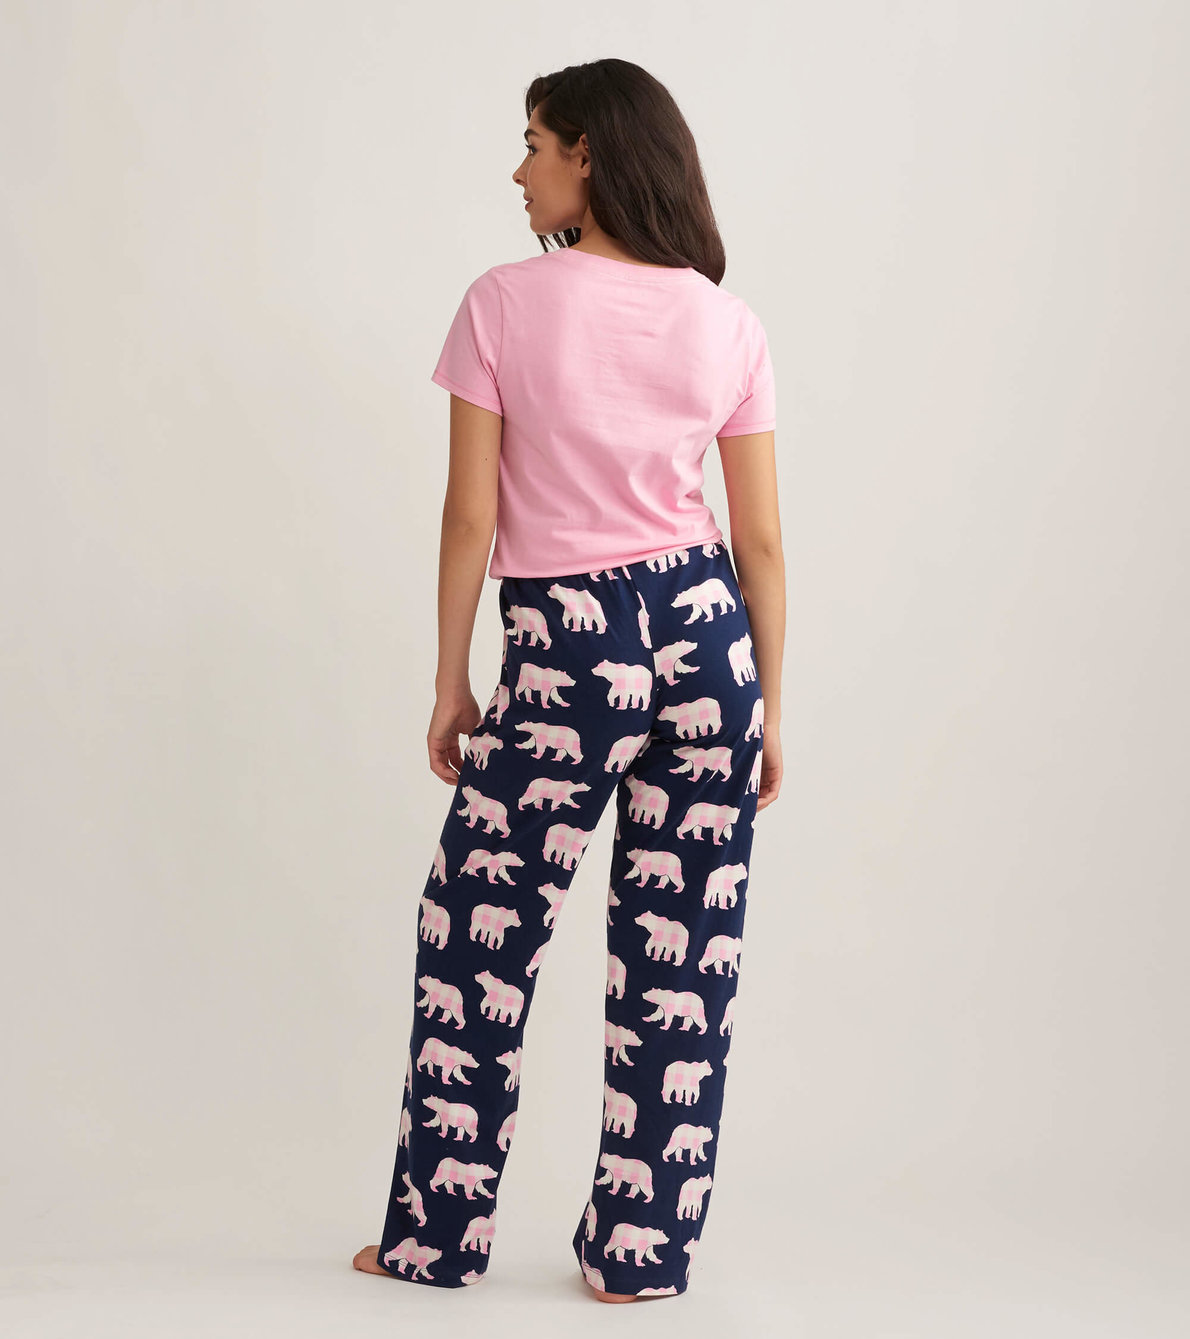 View larger image of Woods Mama Bear Women's Tee and Pants Pajama Separates